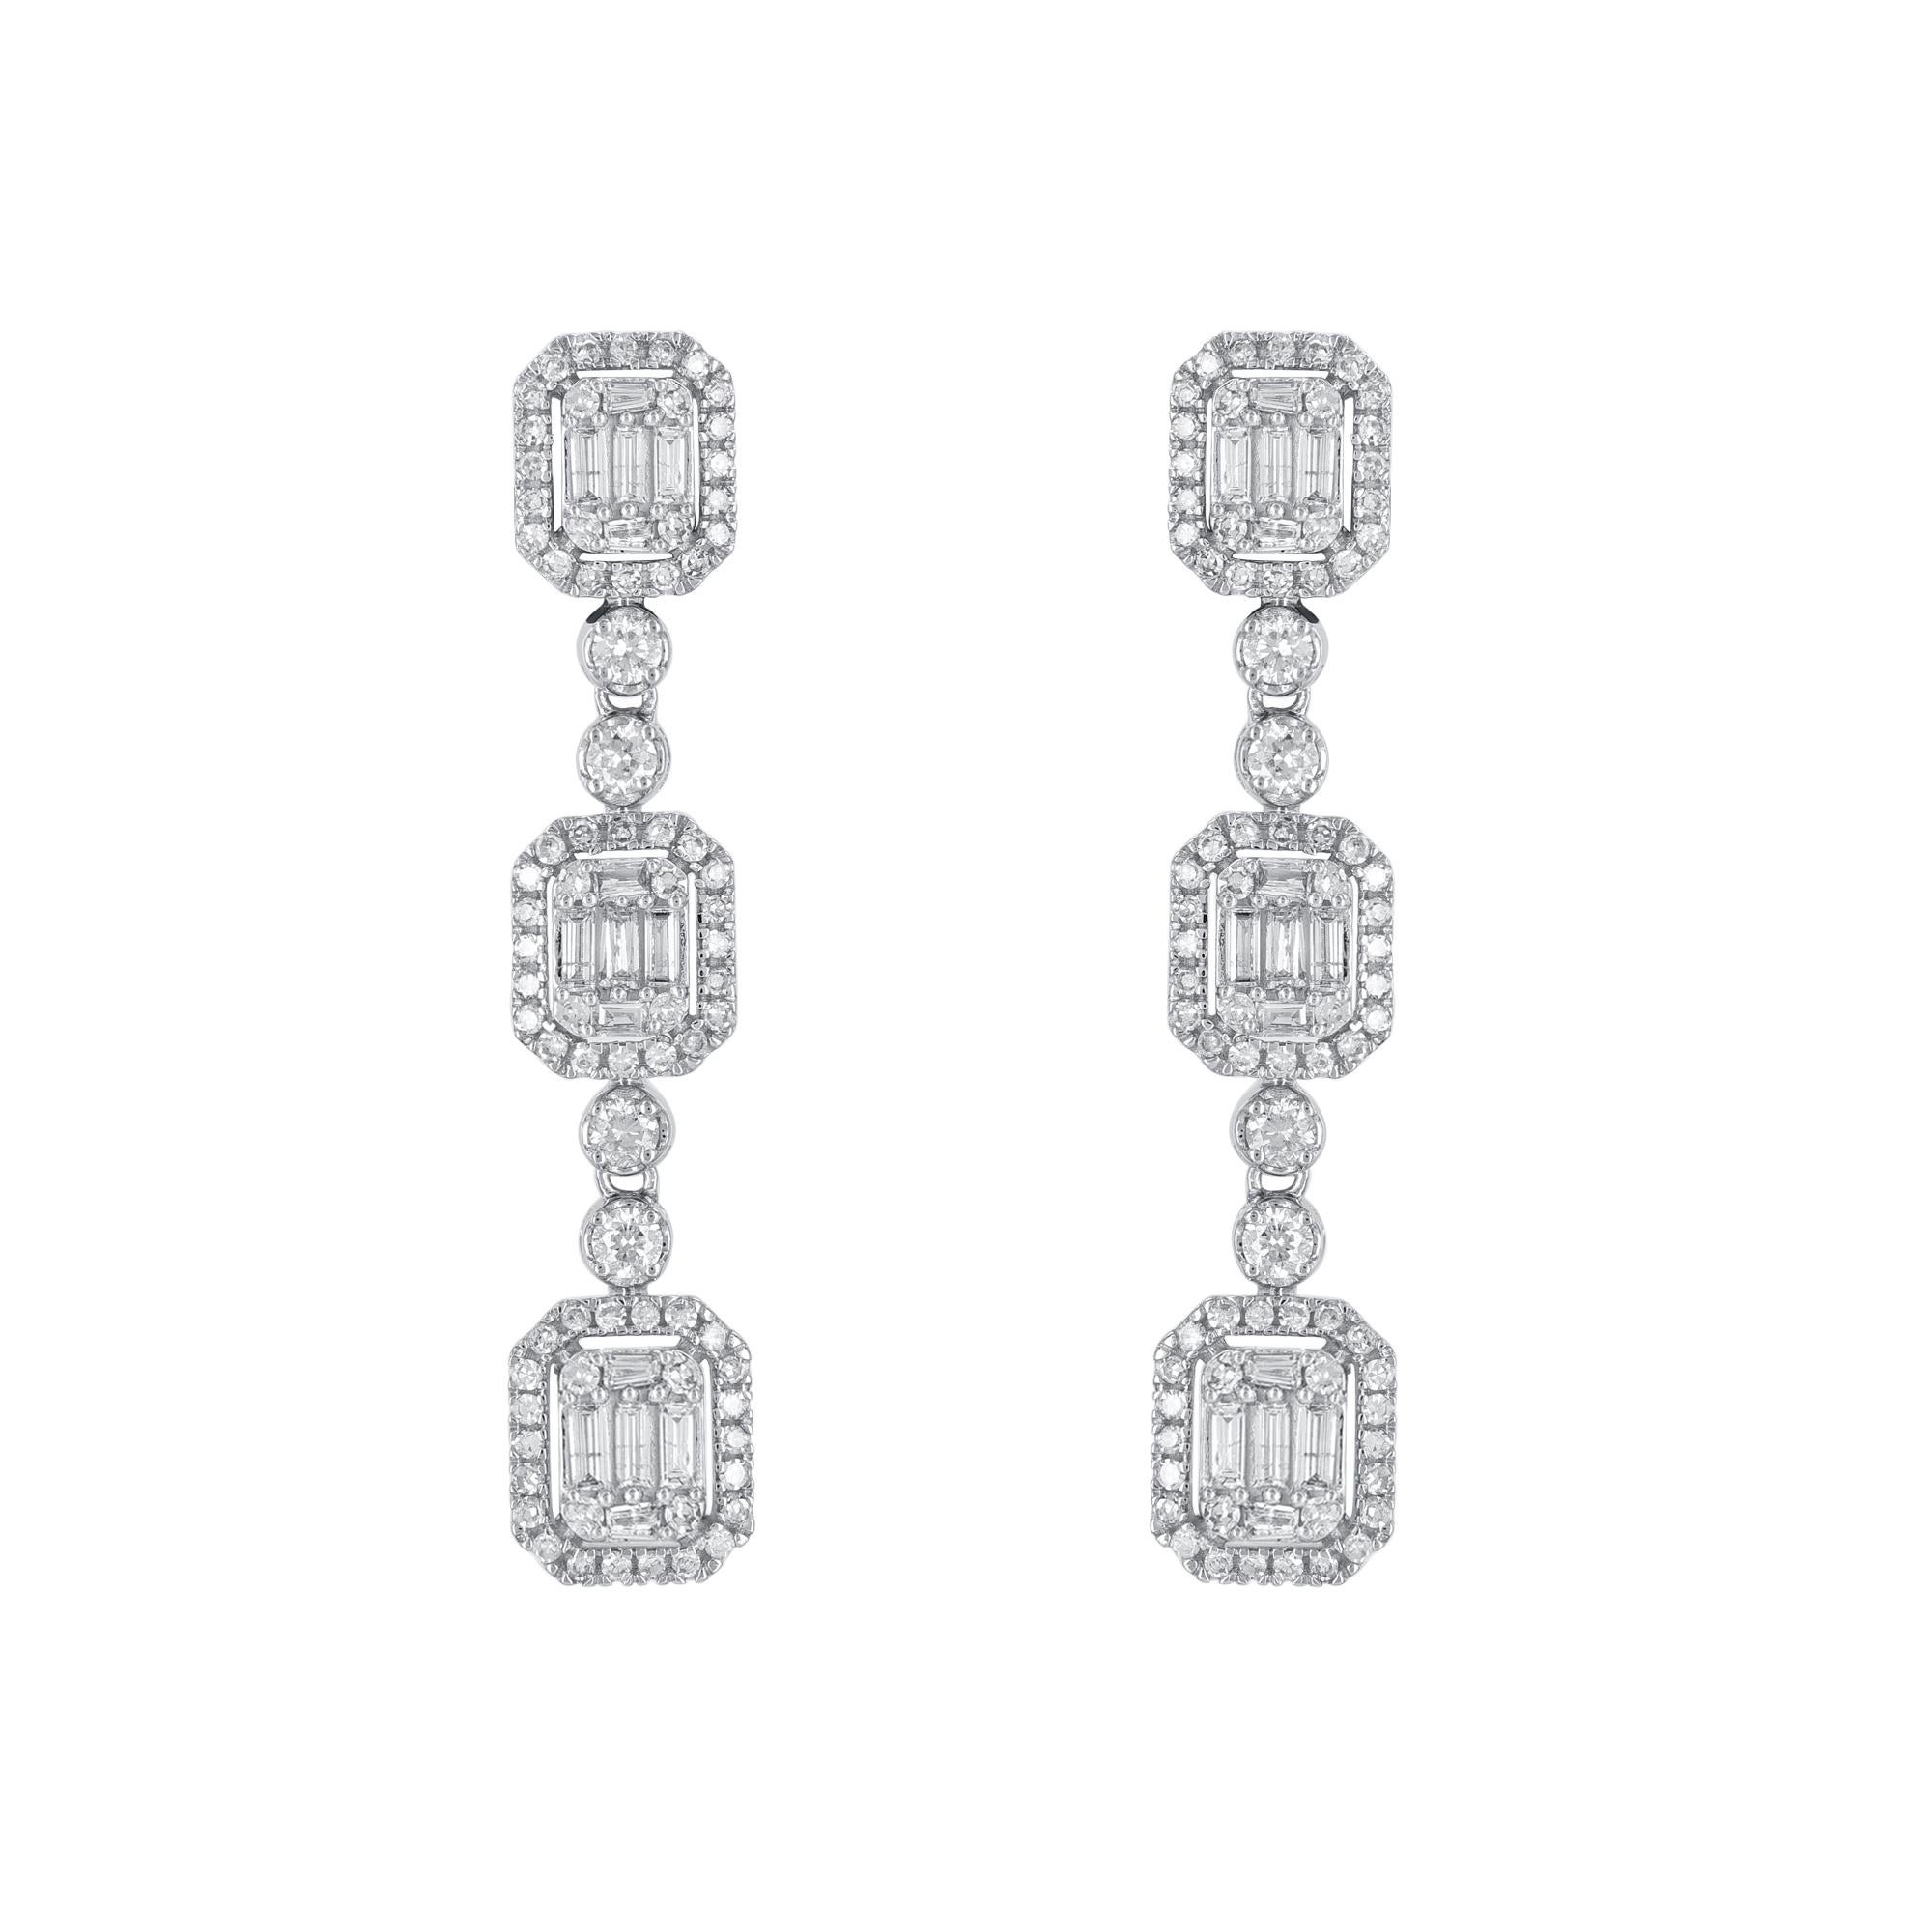 These shimmering and striking diamond stud earrings are perfect for yourself or for gifting to someone special. 
Crafted in 18 karat white gold, earring is filled with 186 brilliant cut, Single cut round diamonds & baguette diamonds in prong and